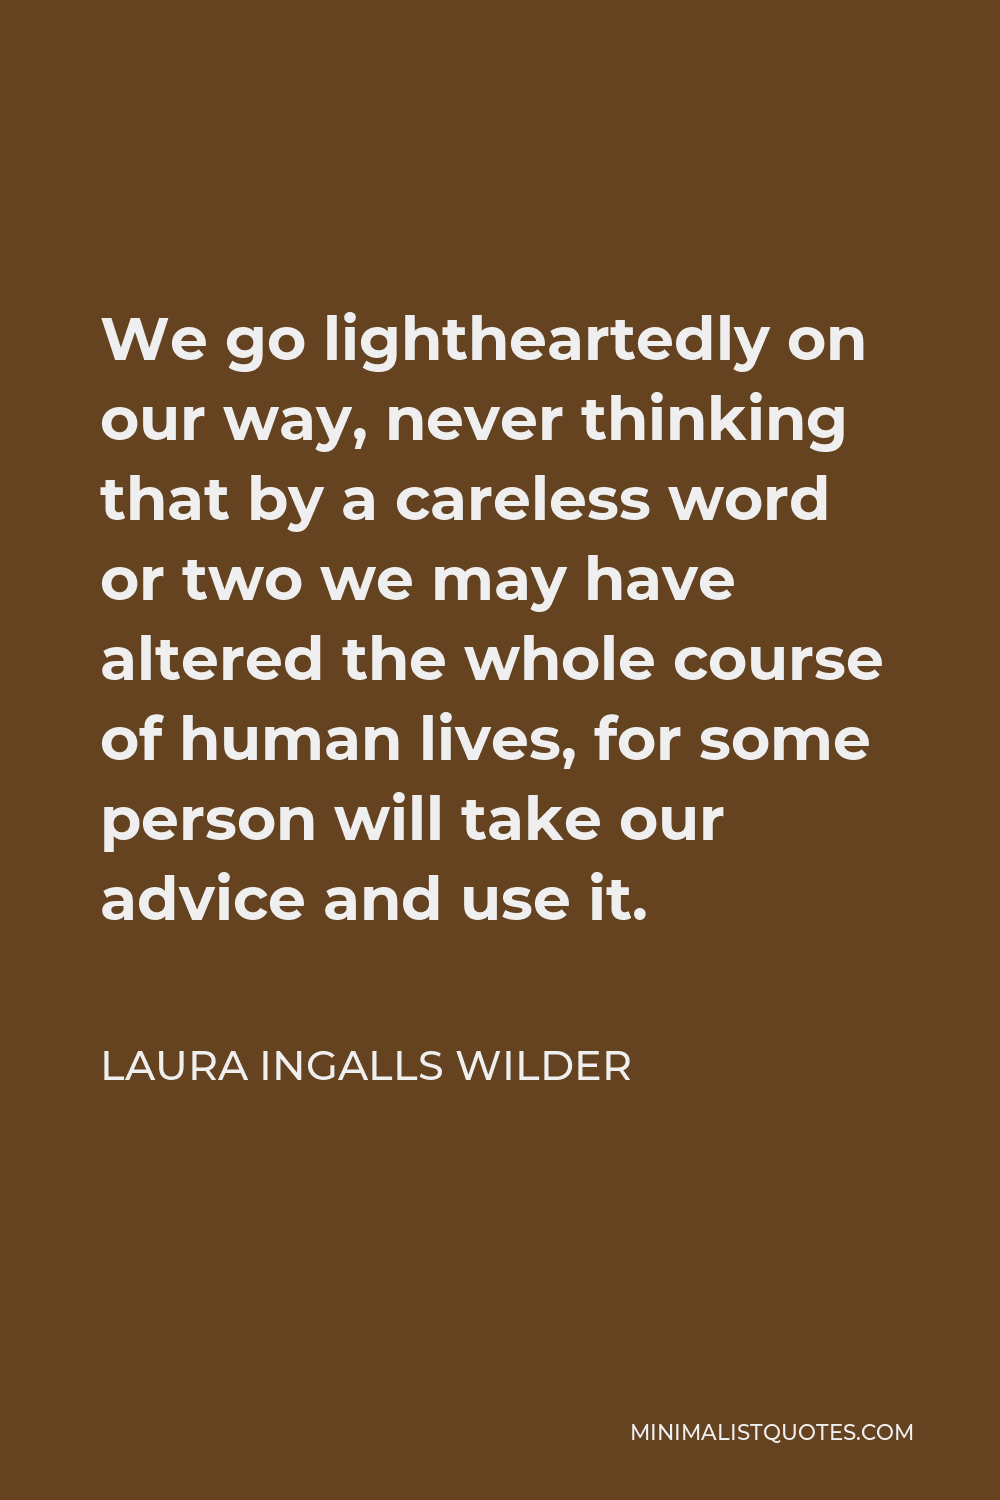 Laura Ingalls Wilder Quote - We go lightheartedly on our way, never thinking that by a careless word or two we may have altered the whole course of human lives, for some person will take our advice and use it.